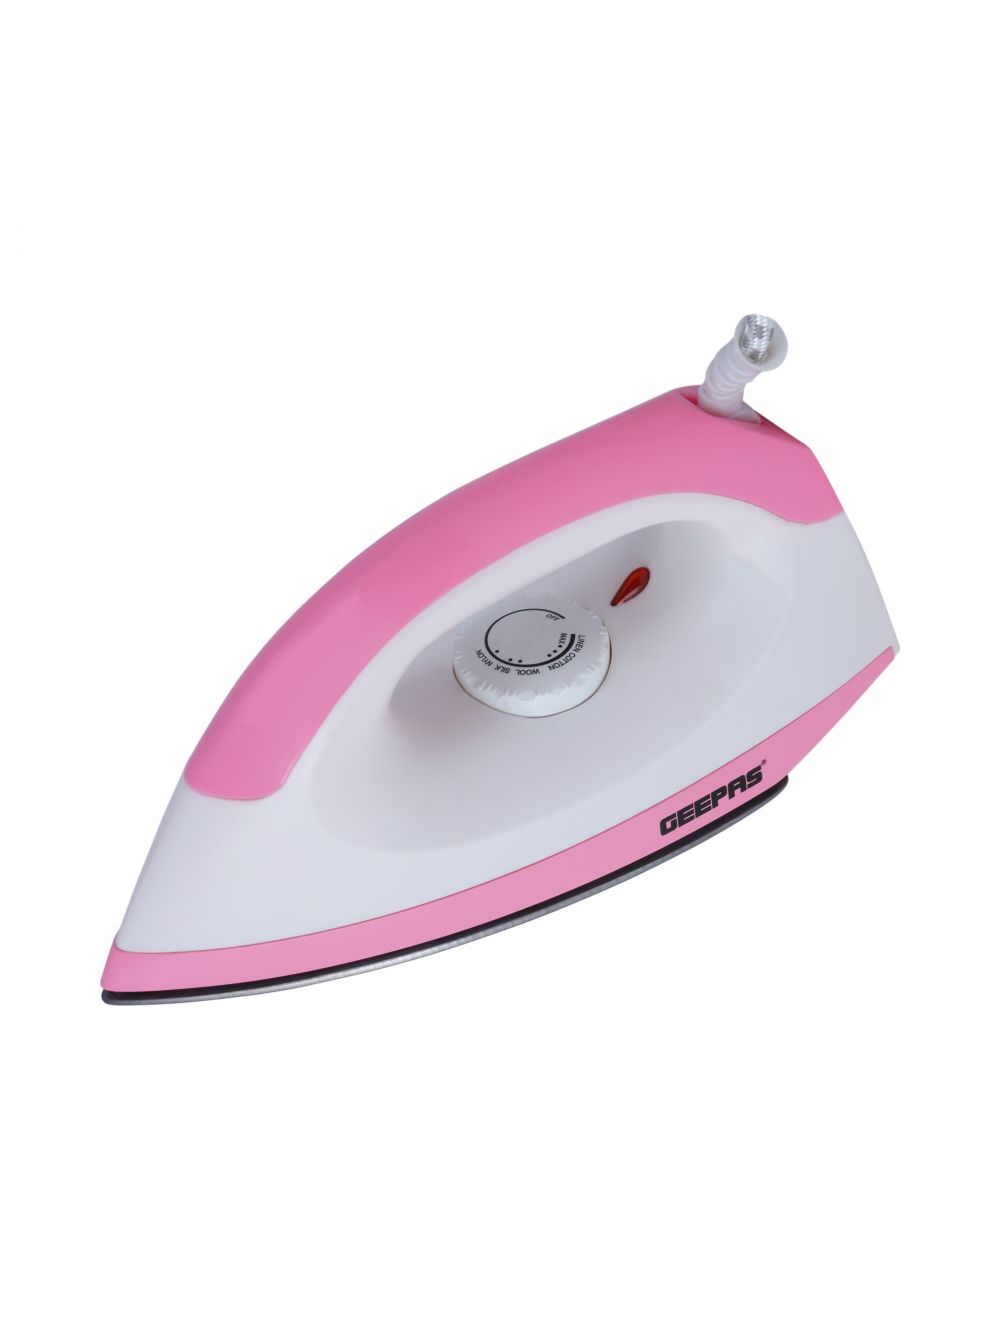 Geepas 1200W Dry Iron | reliable performance | lightweight | variable steam settings | safety features | stylish | even heat distribution | Halabh.com